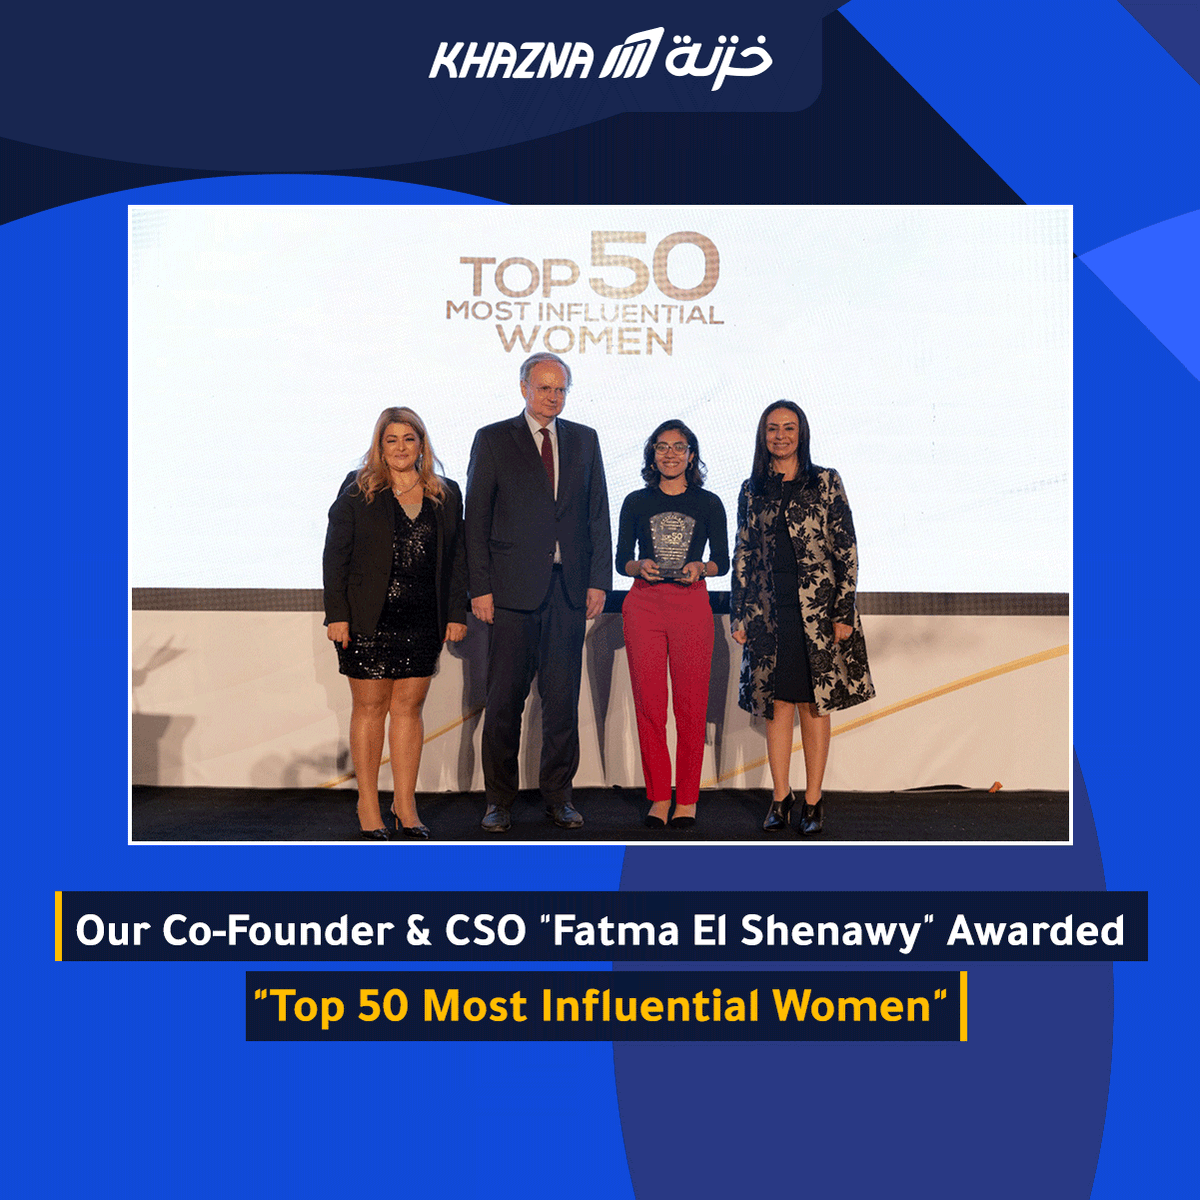 Congratulations to our Co-Founder and CSO 'Fatma El Shenawy' for winning the 'Top 50 Most Influential Women' Award.
Thanks @Top50WomenForum 
#Fintech #top50womenforum